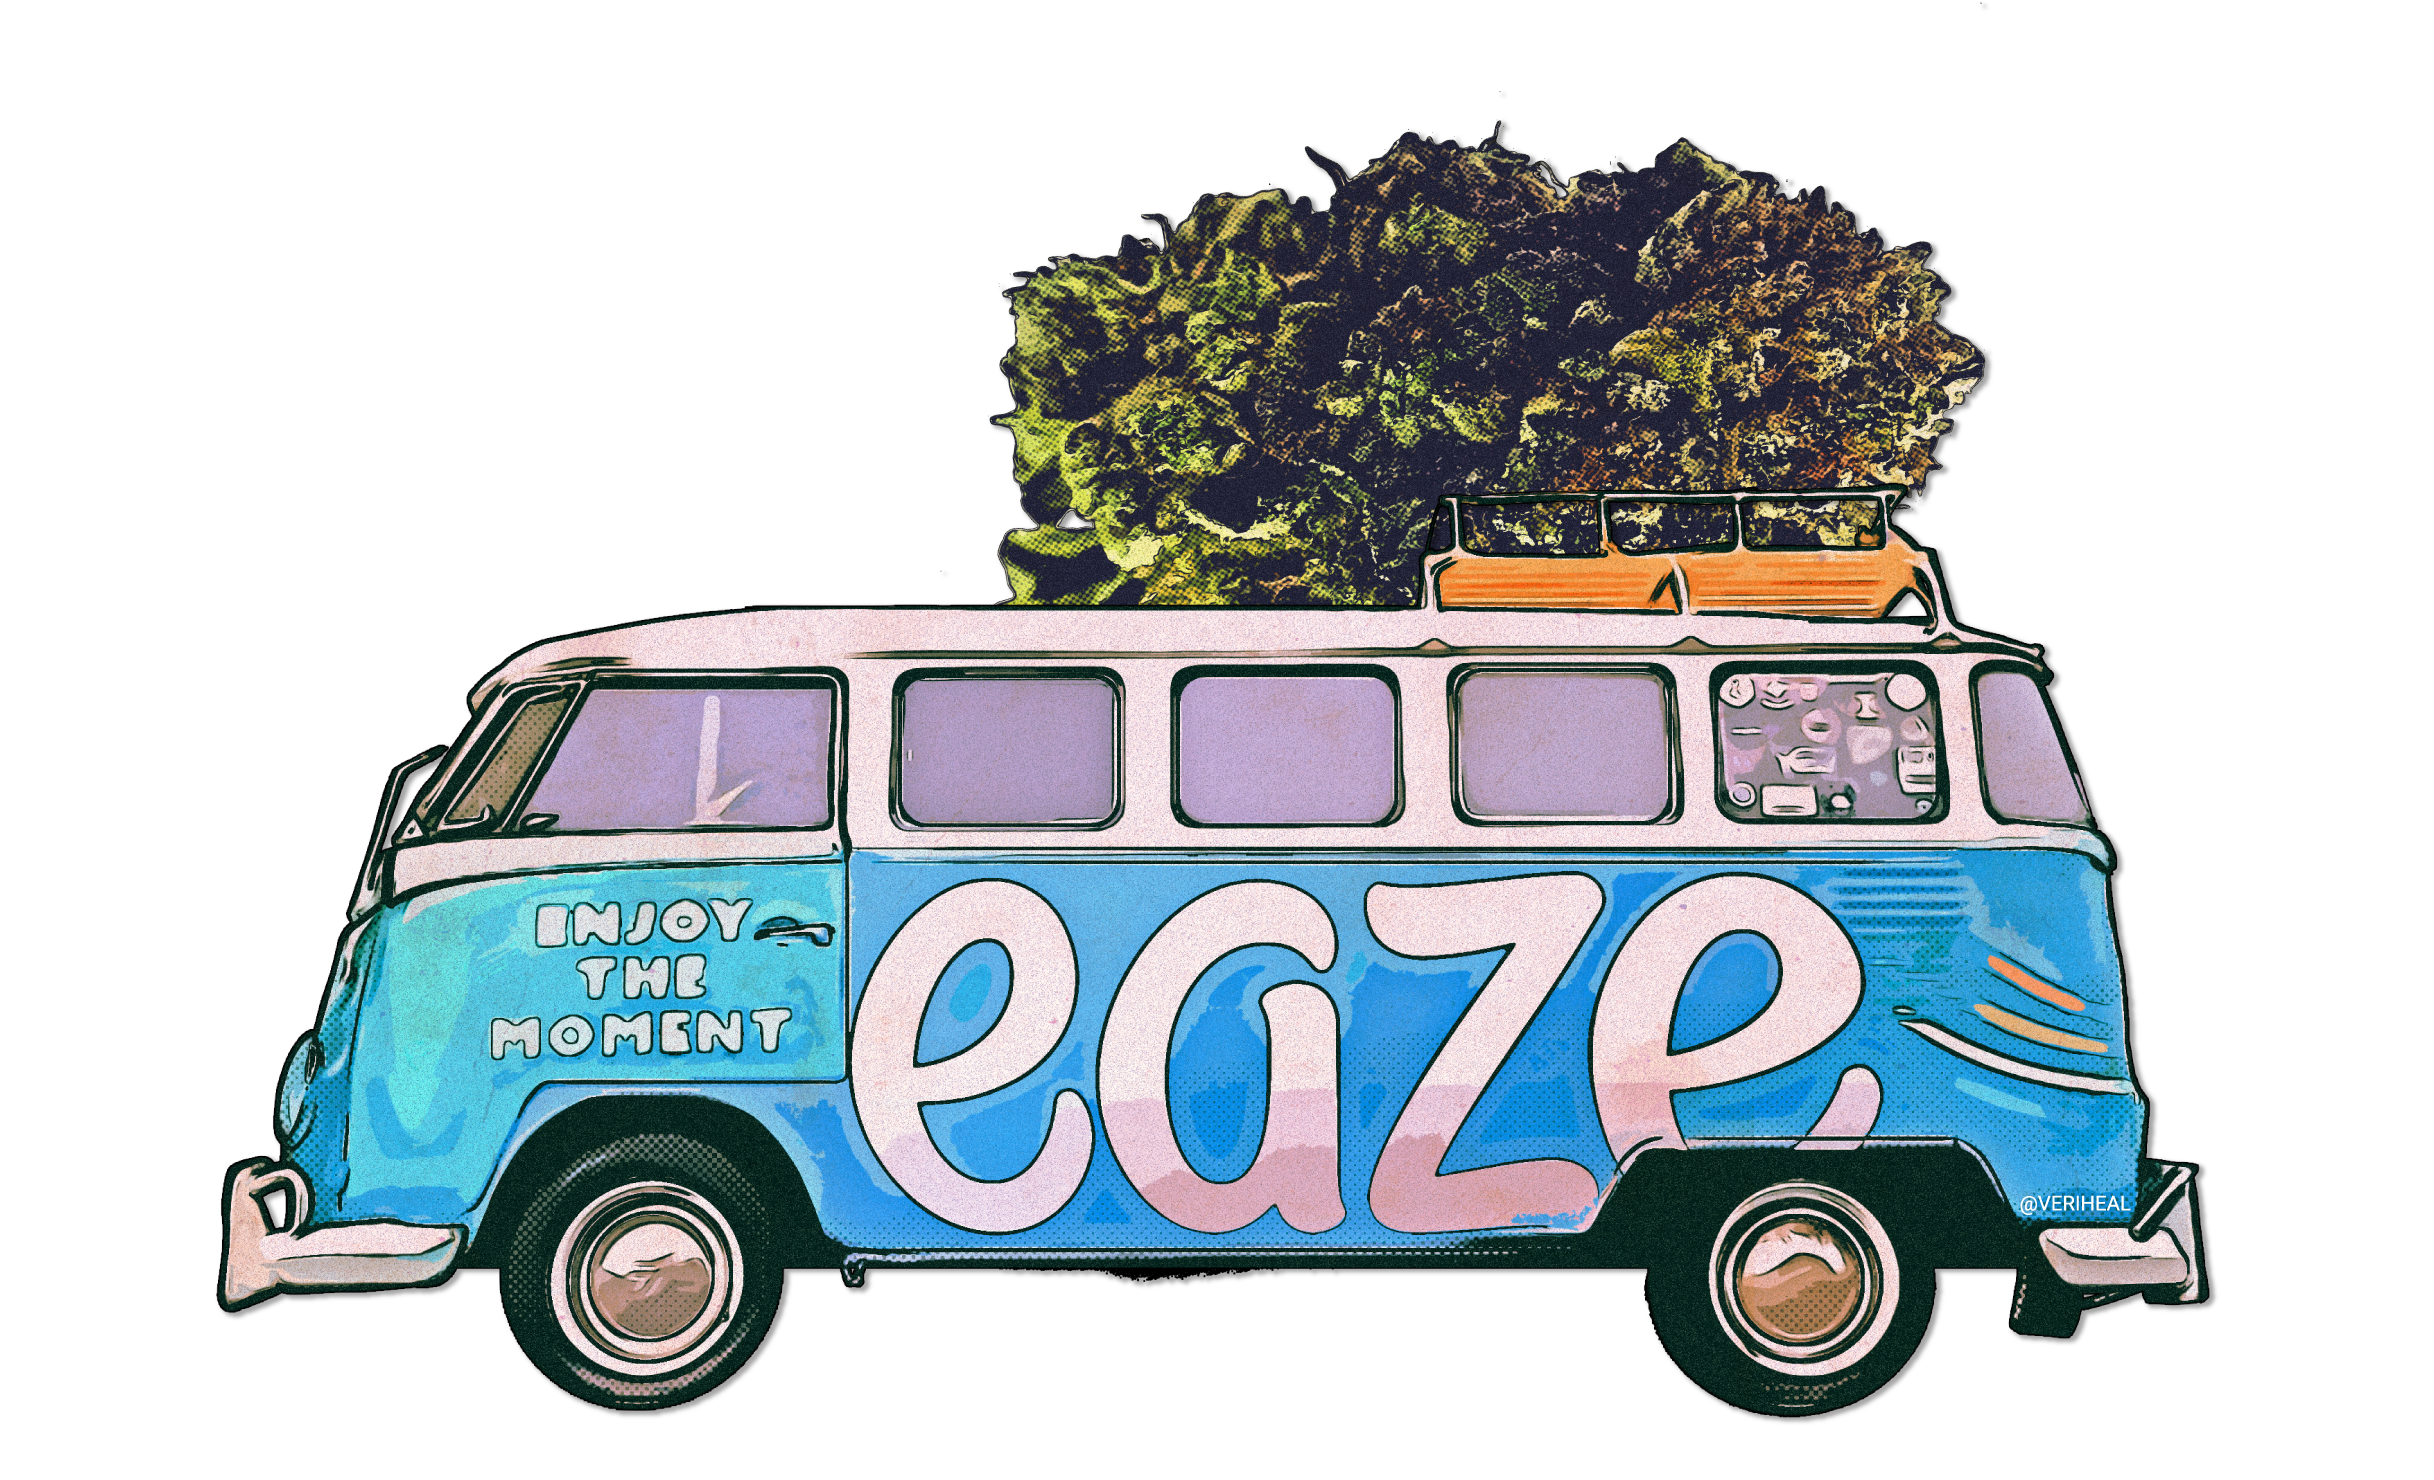 Eaze-Establishes-Compassionate-Care-Program-to-Provide-Low-income-Patients-with-Medical-Cannabis-3